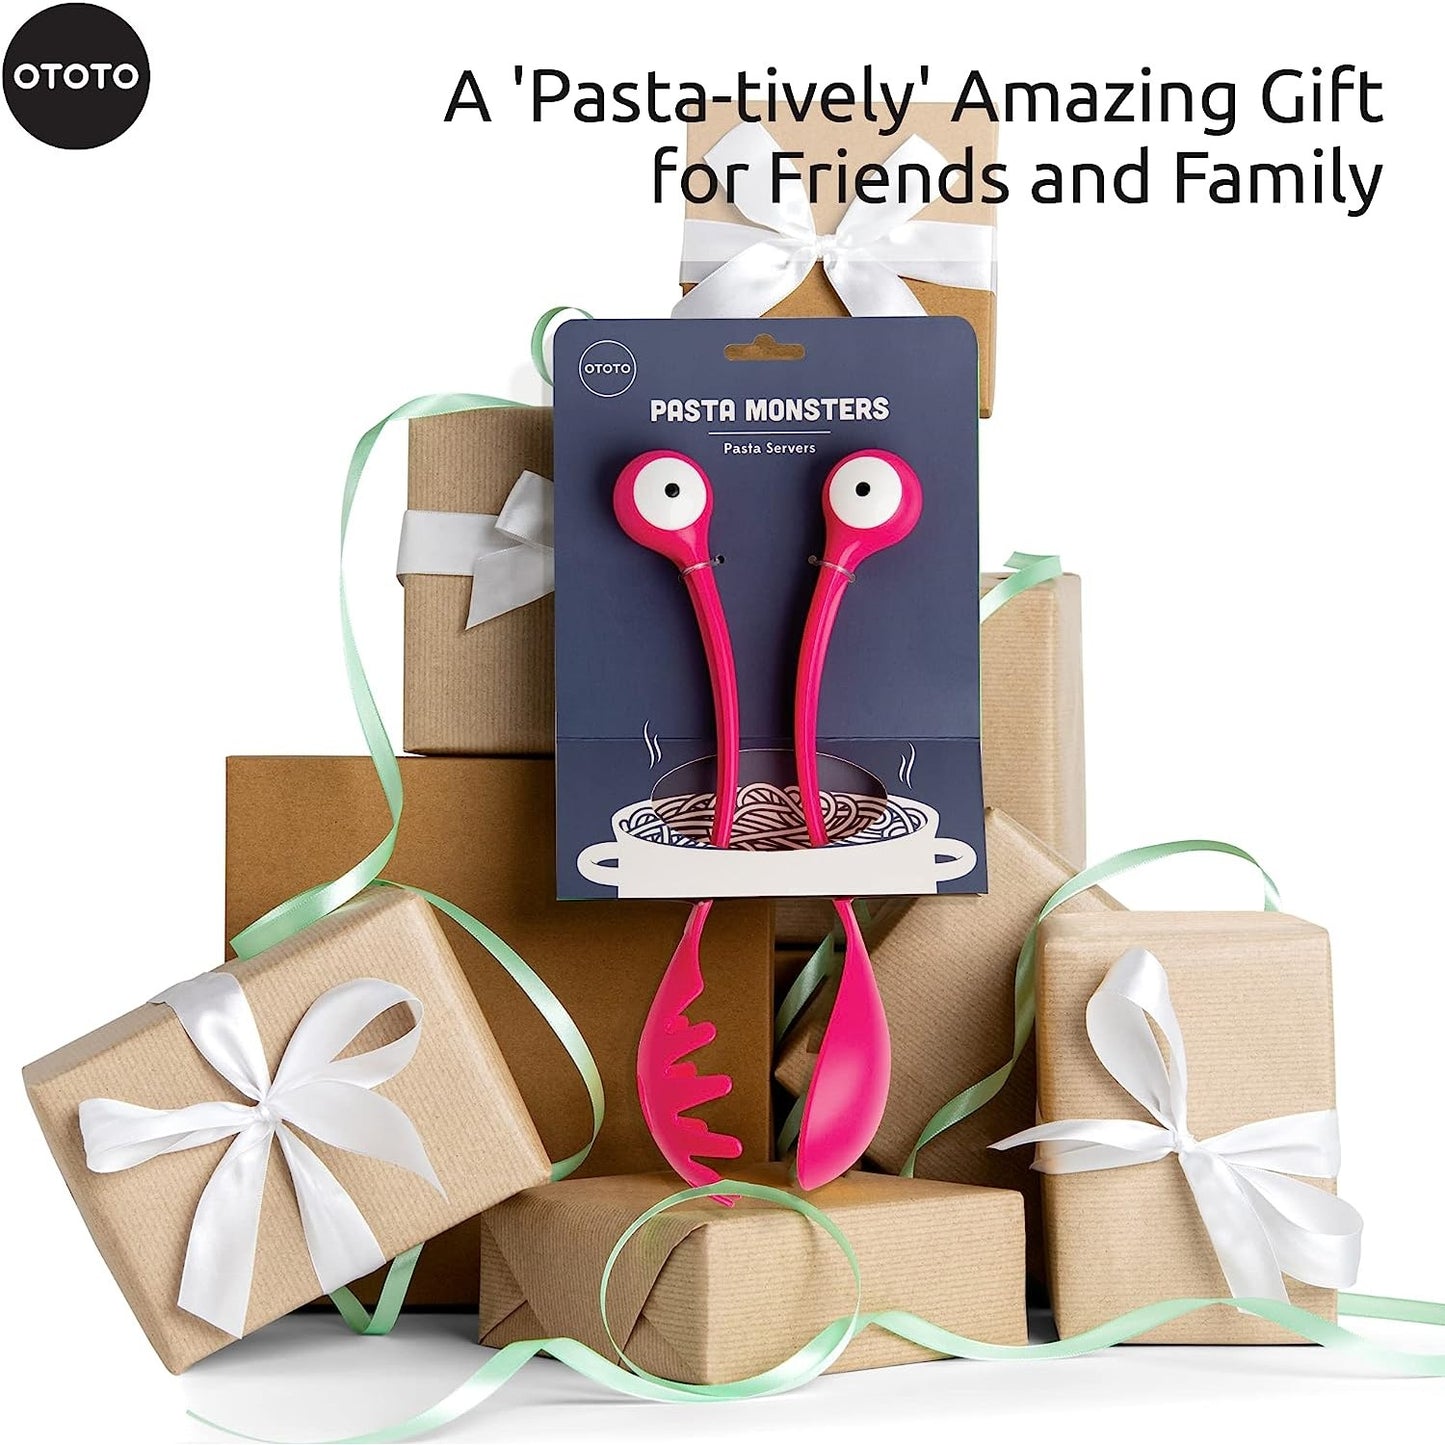 A fun pair of pasta and salad servers with eyeballs that resemble a monster. There are brown gift wrapped packages in the background.